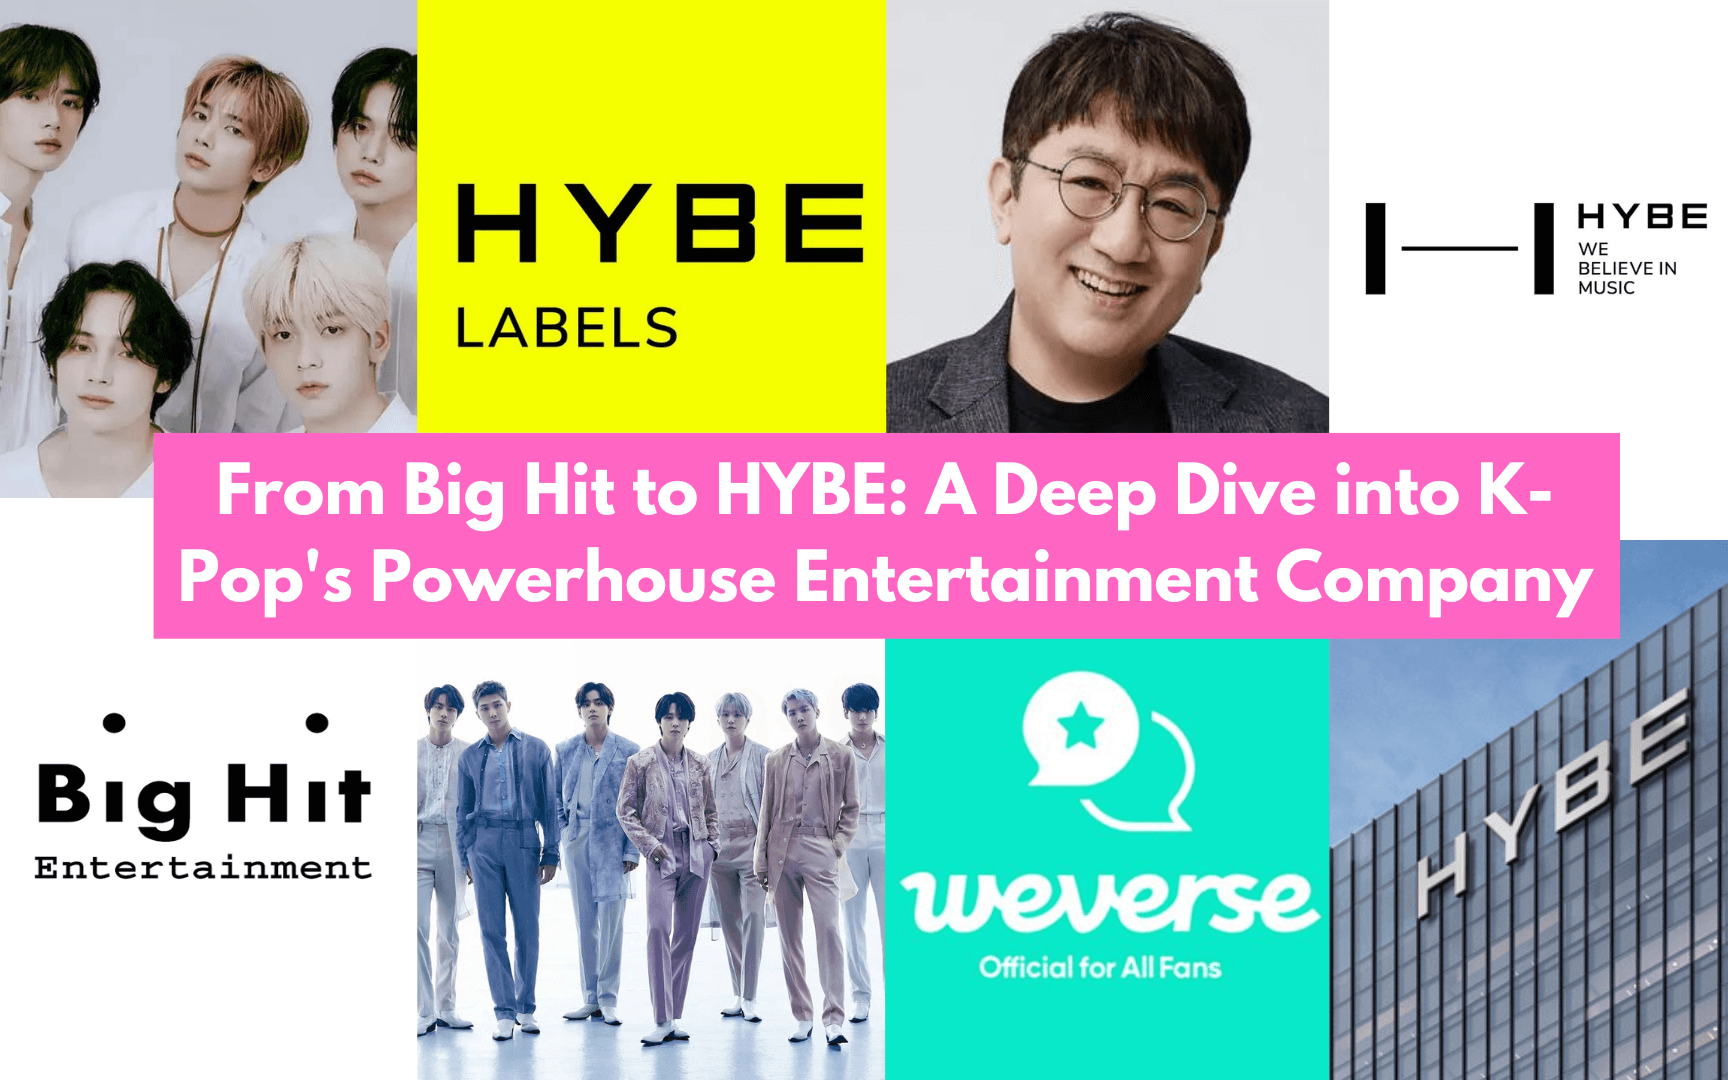 From Big Hit to HYBE: A Deep Dive into K-Pop's Powerhouse Entertainment Company